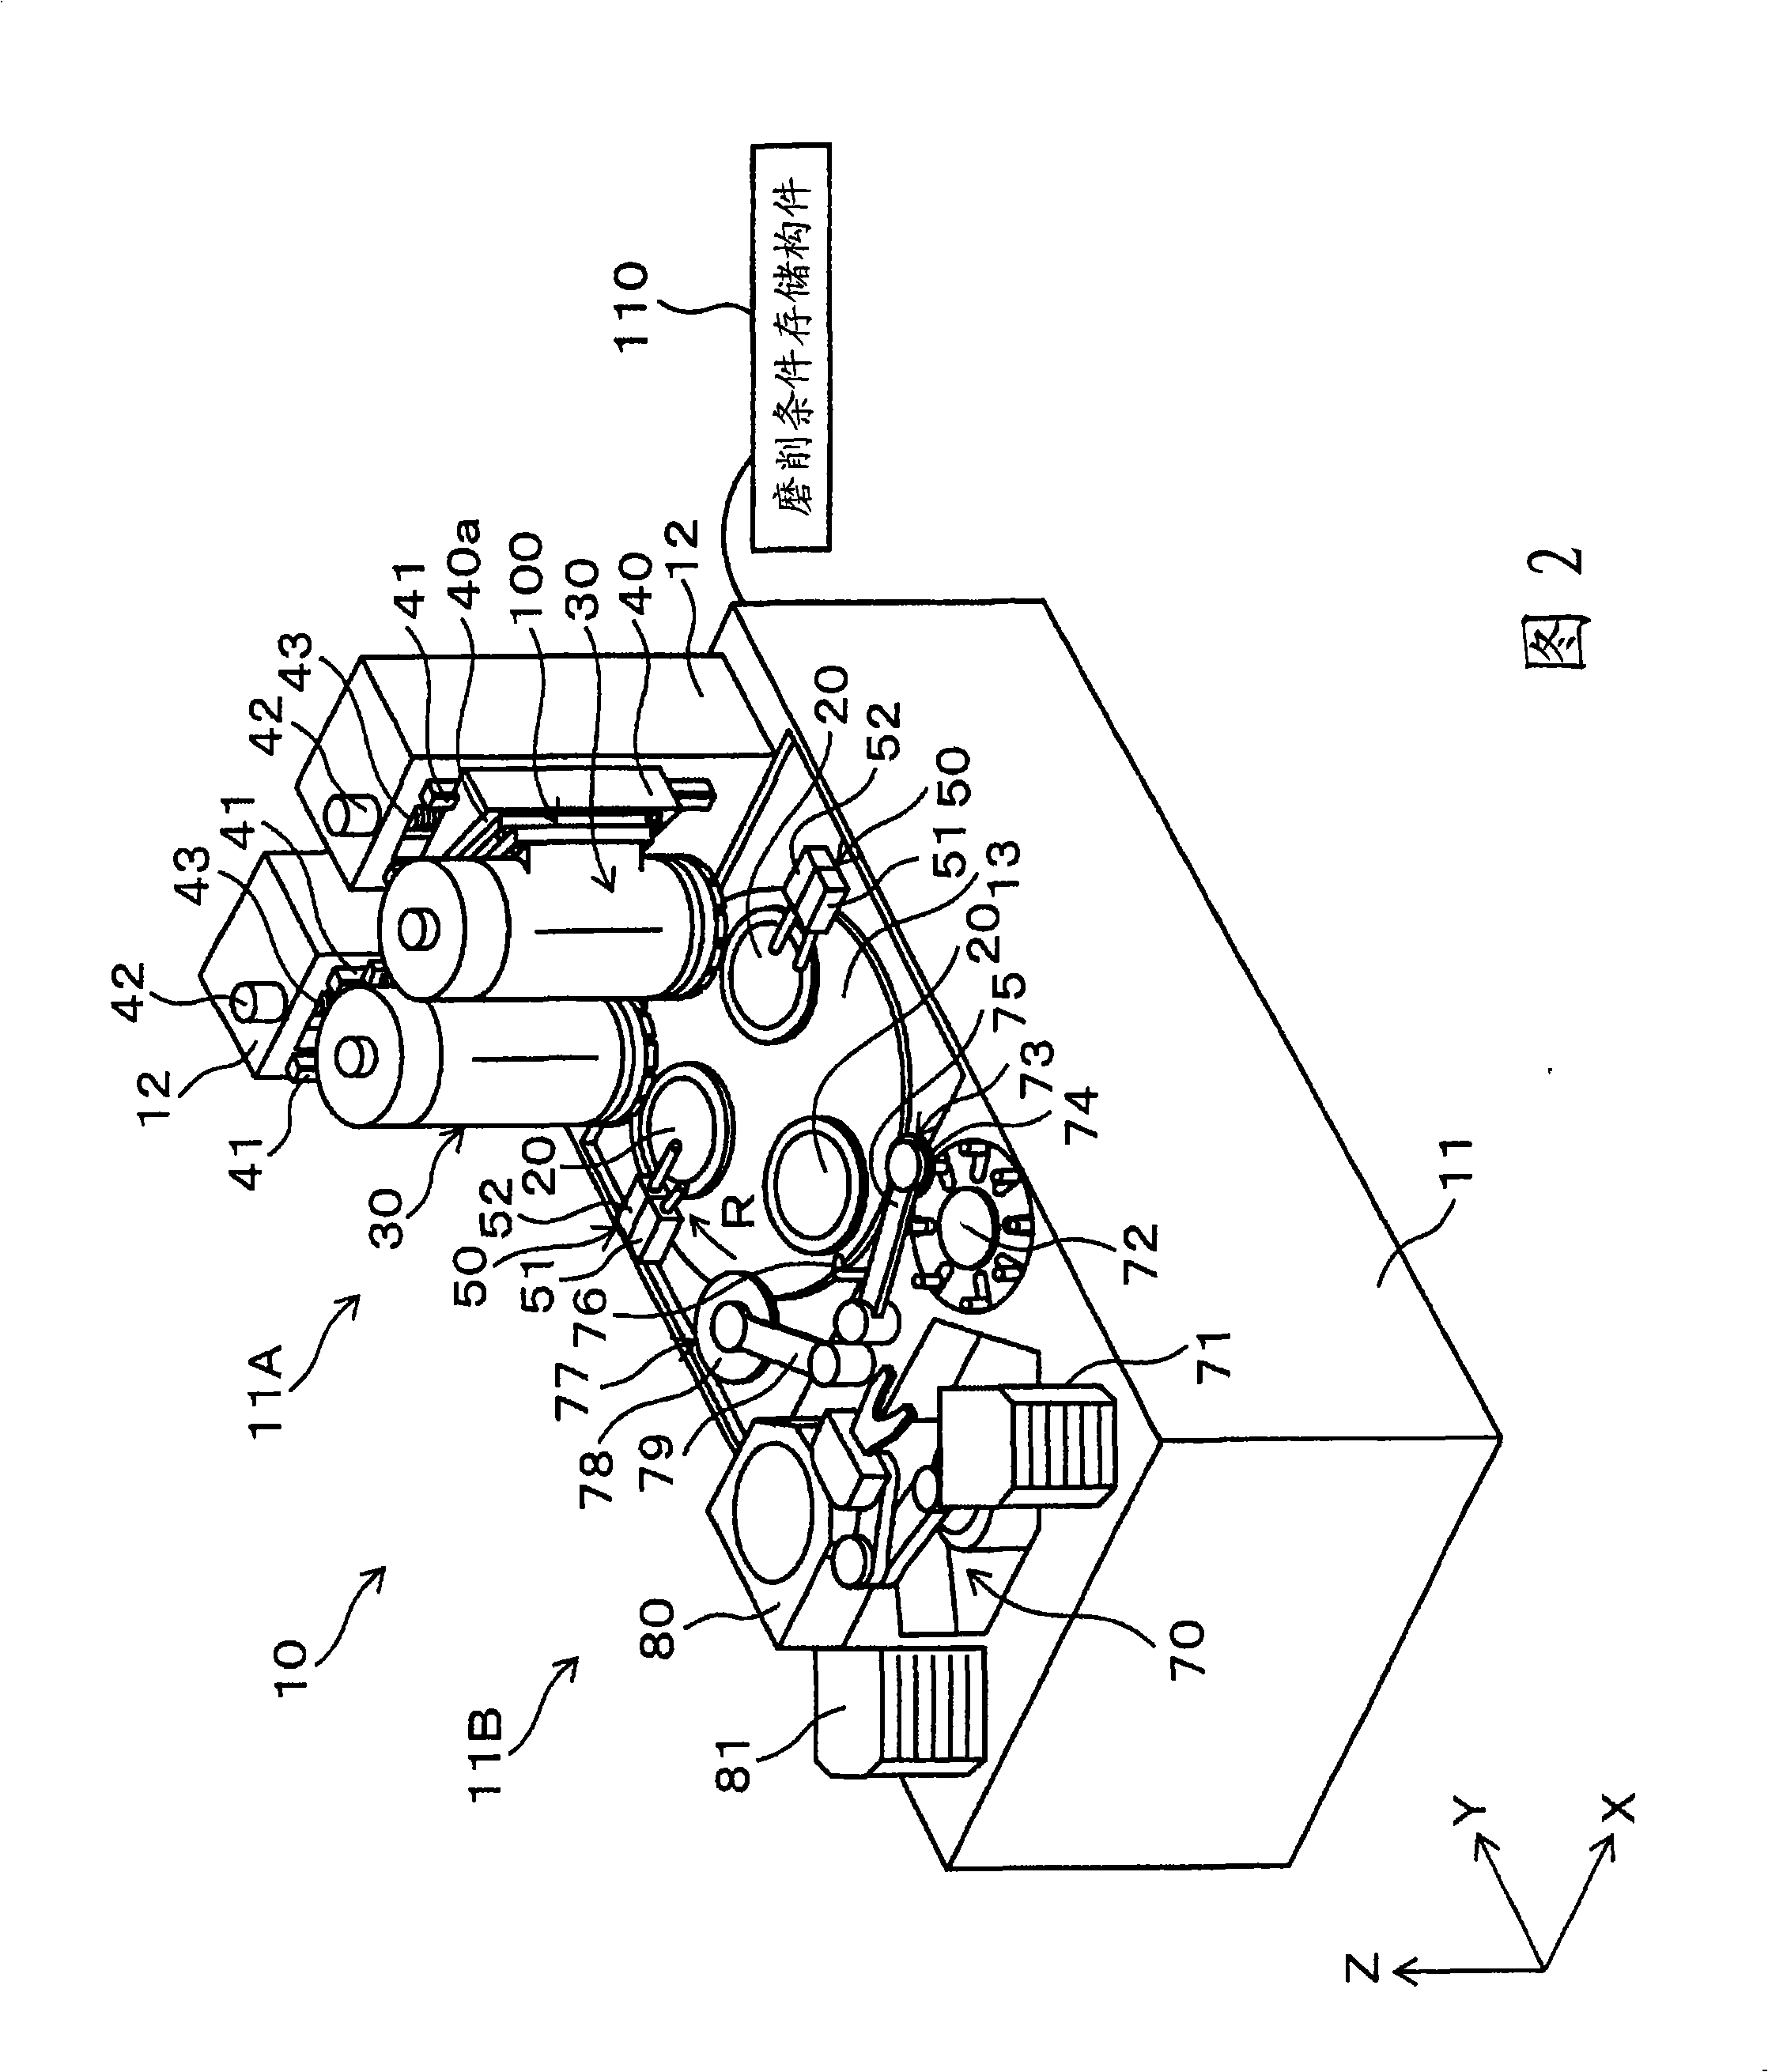 Milling processing device for wafer